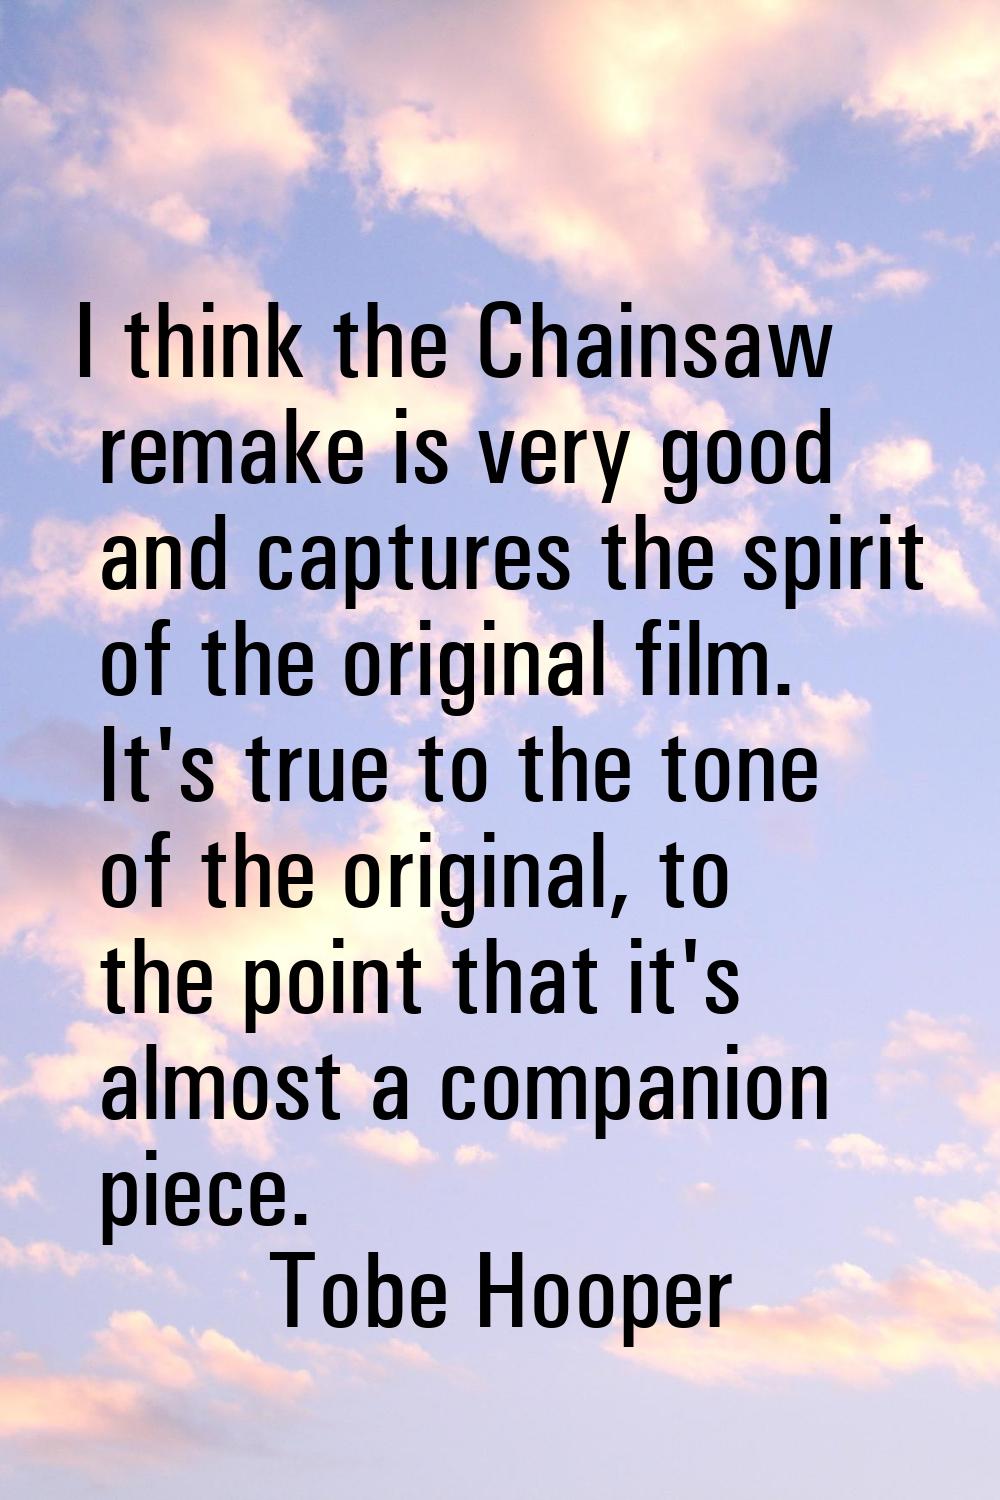 I think the Chainsaw remake is very good and captures the spirit of the original film. It's true to